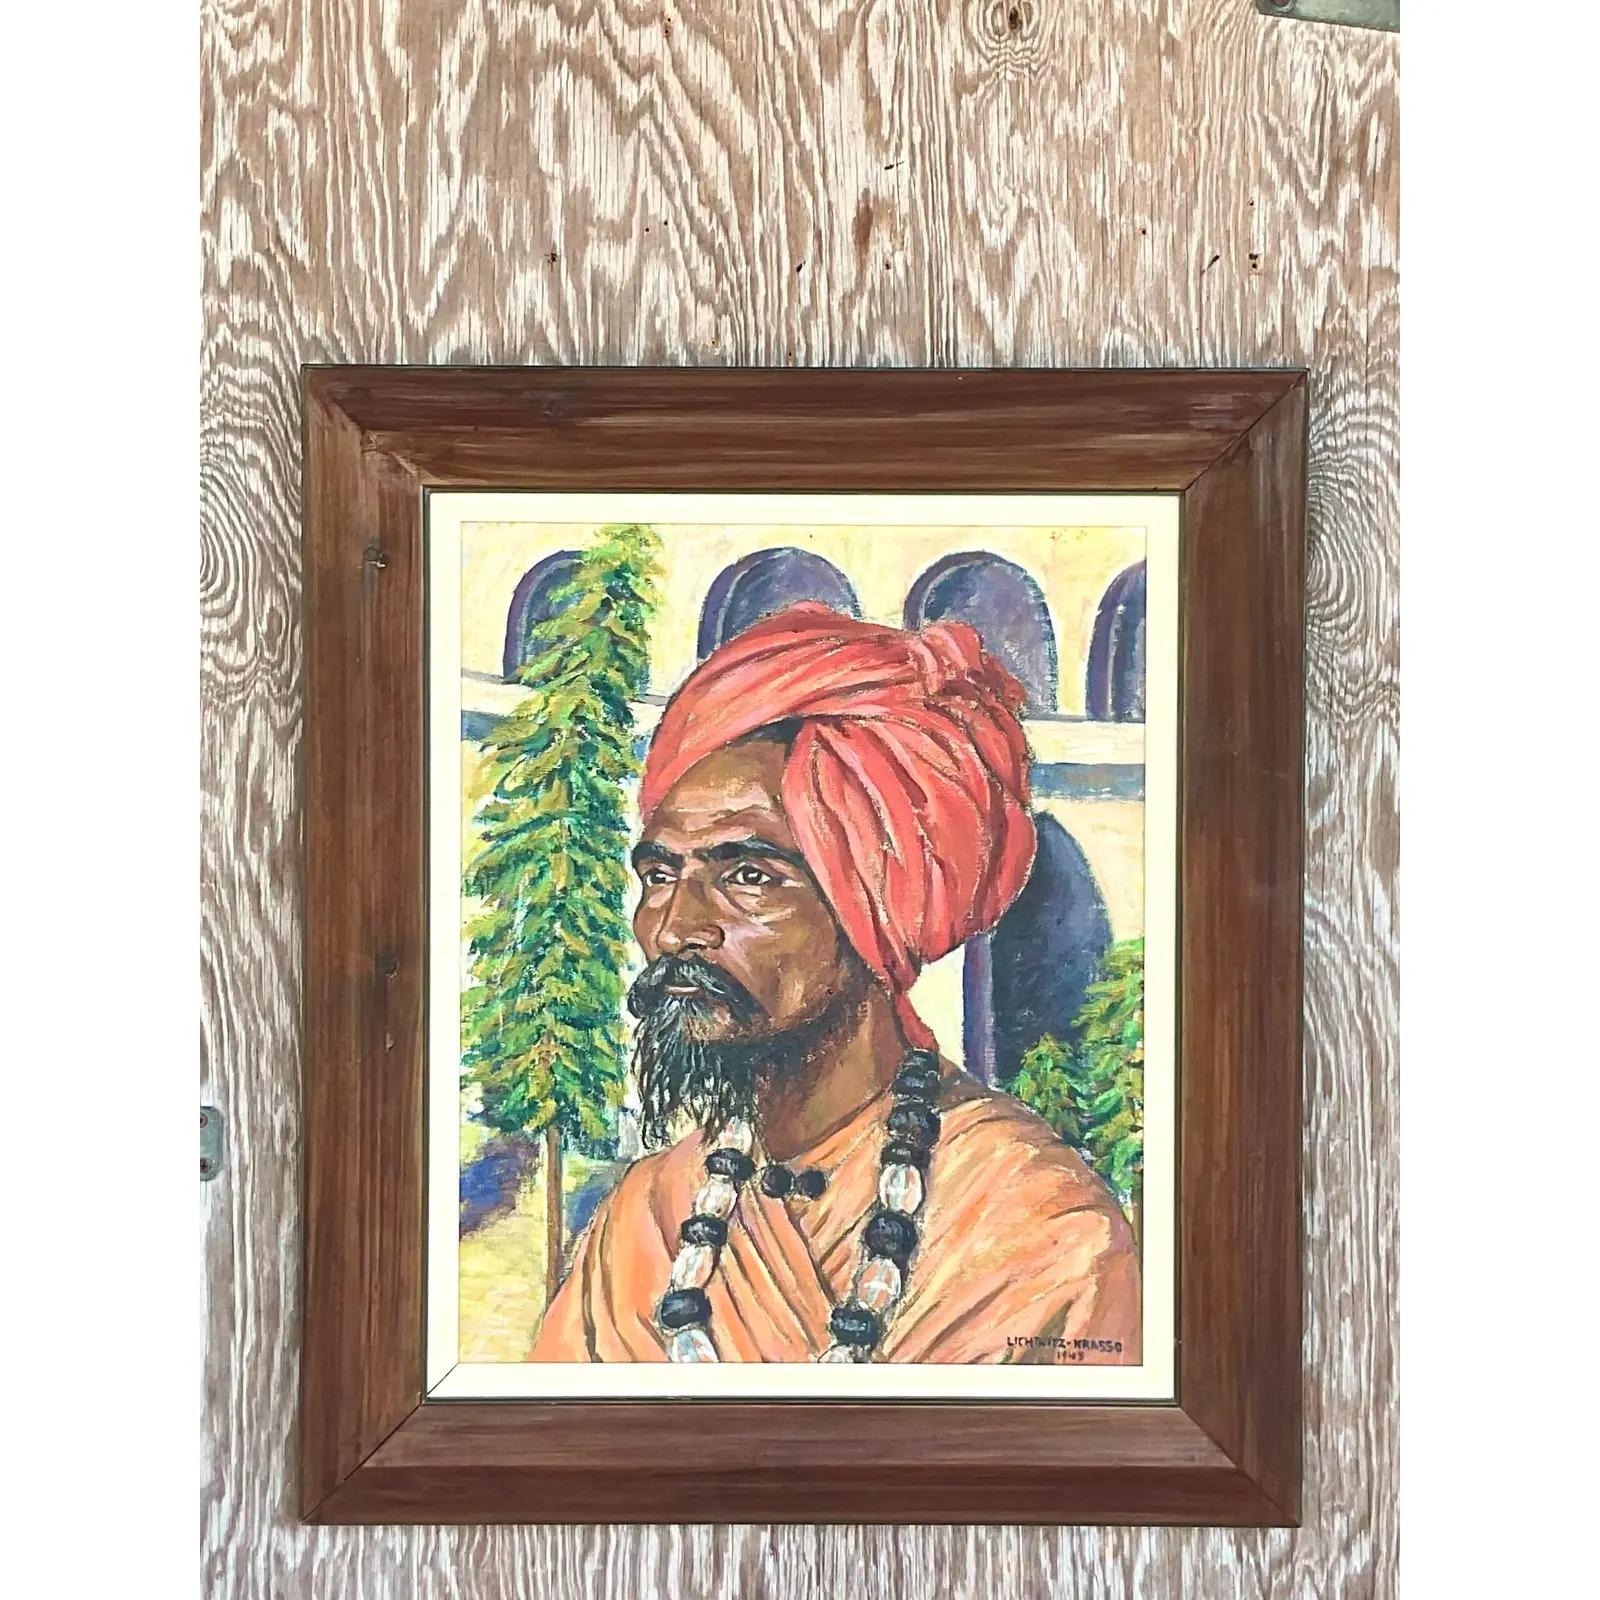 Vintage Boho Signed 1941 Original Oil Painting of Man in Turban For Sale 4